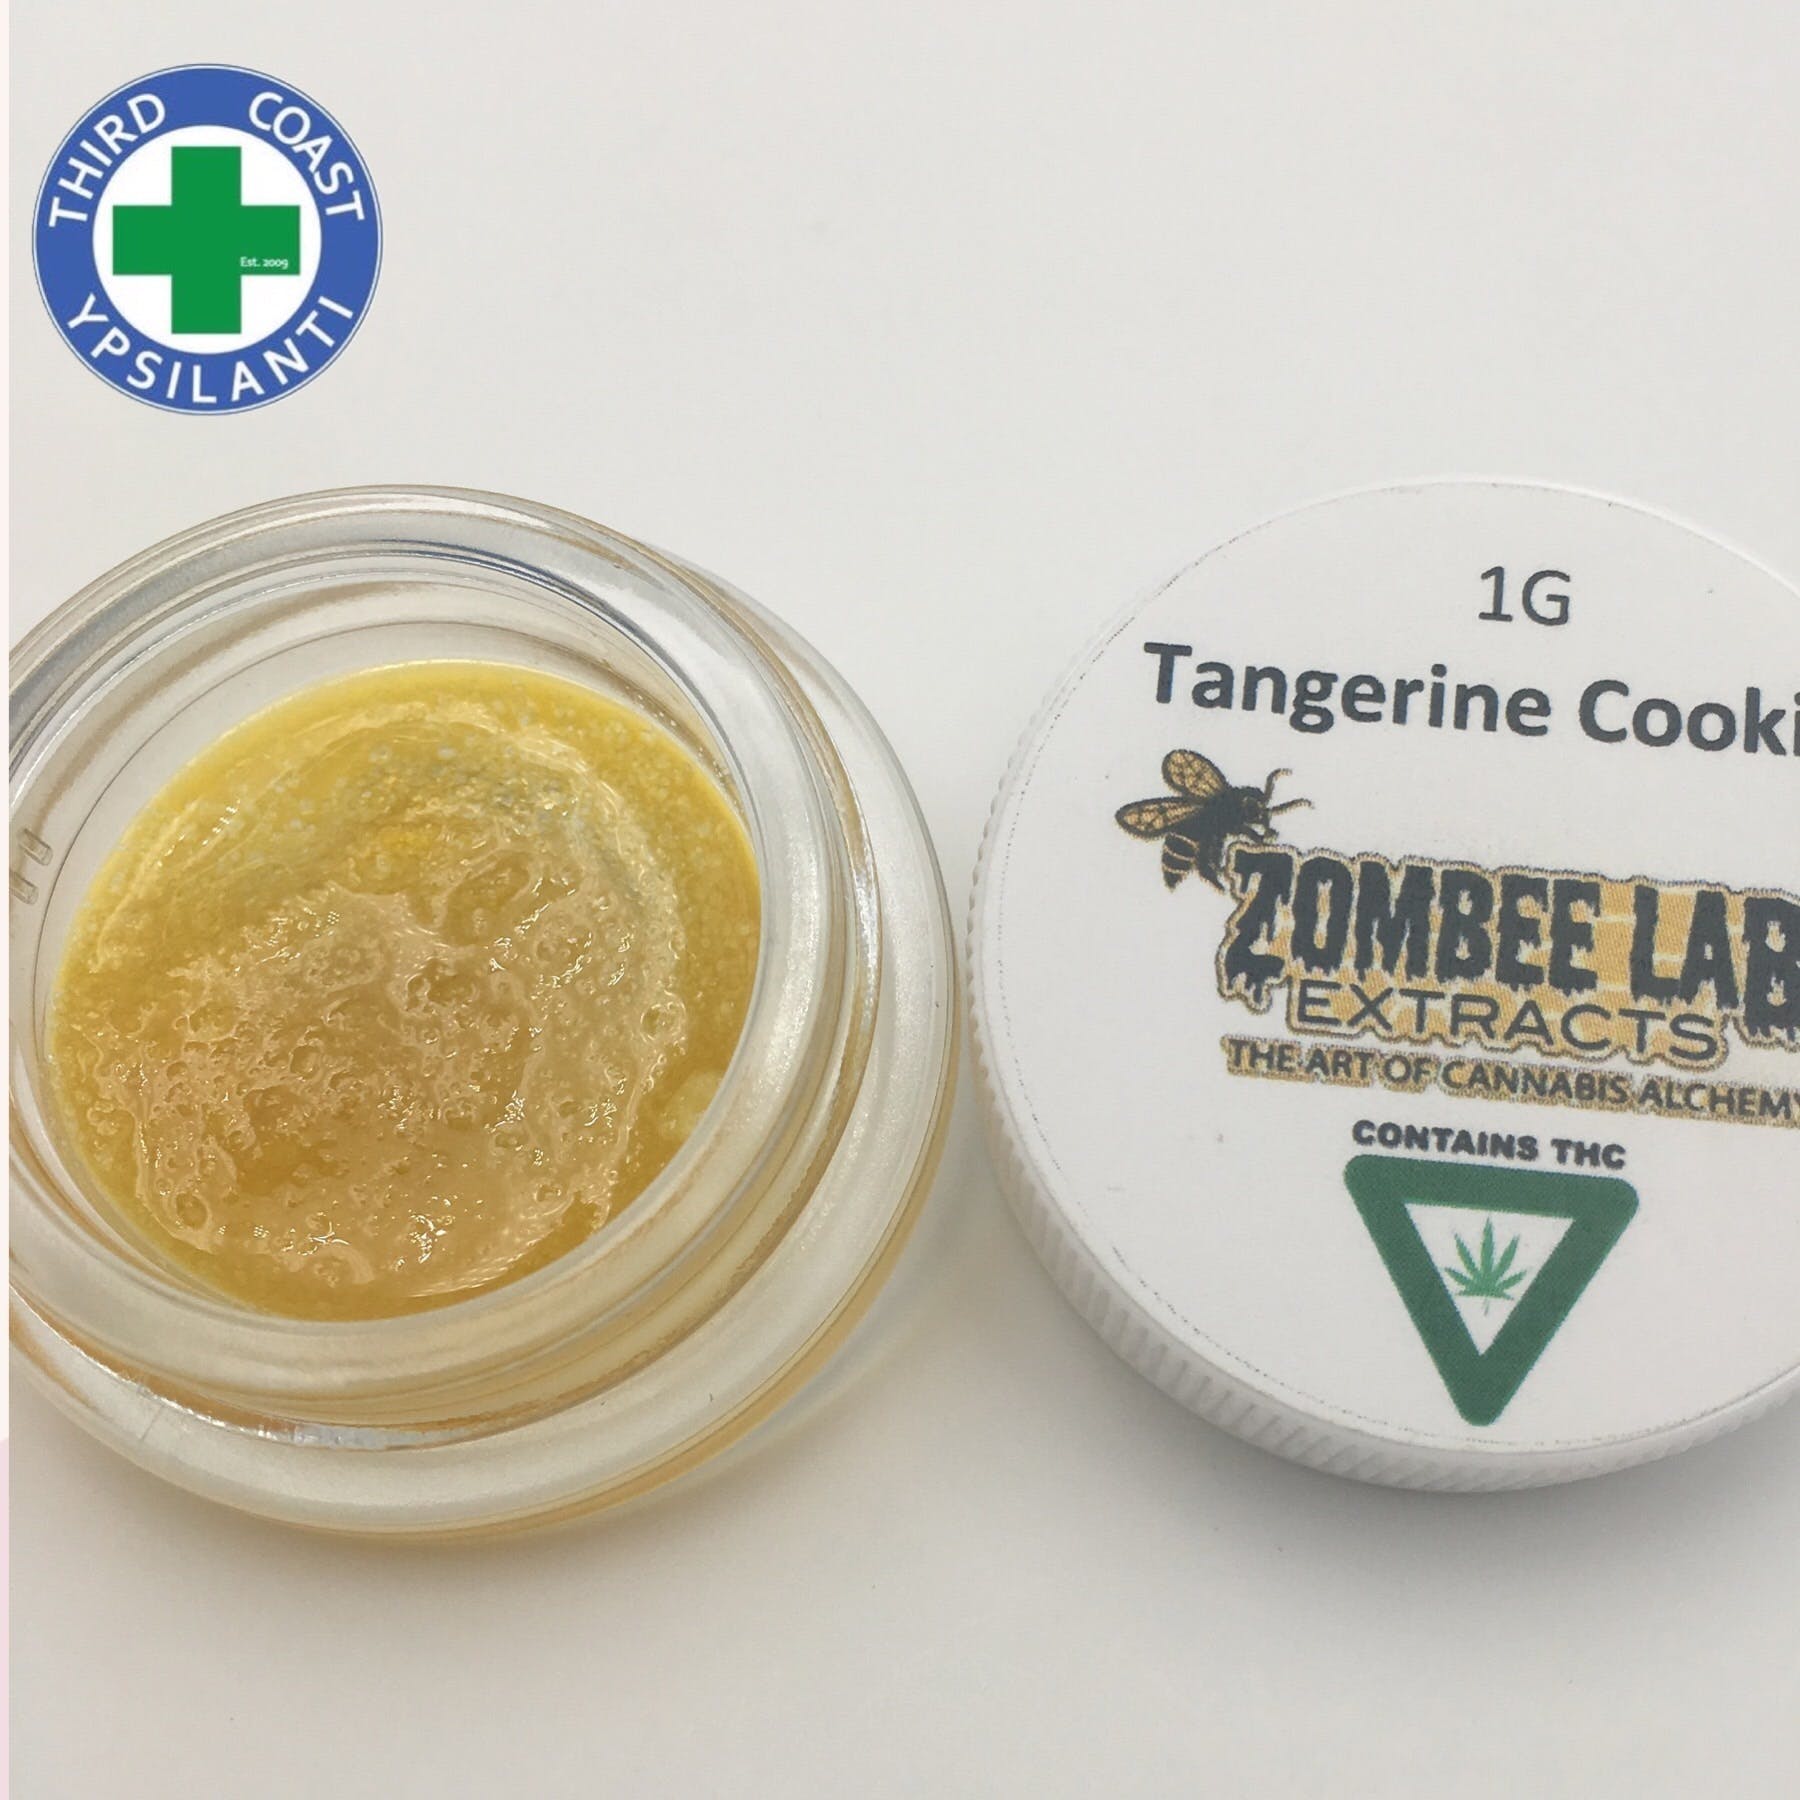 Sauce - Tangie Cookies (FULL GRAM) Processed By Zombee Lab